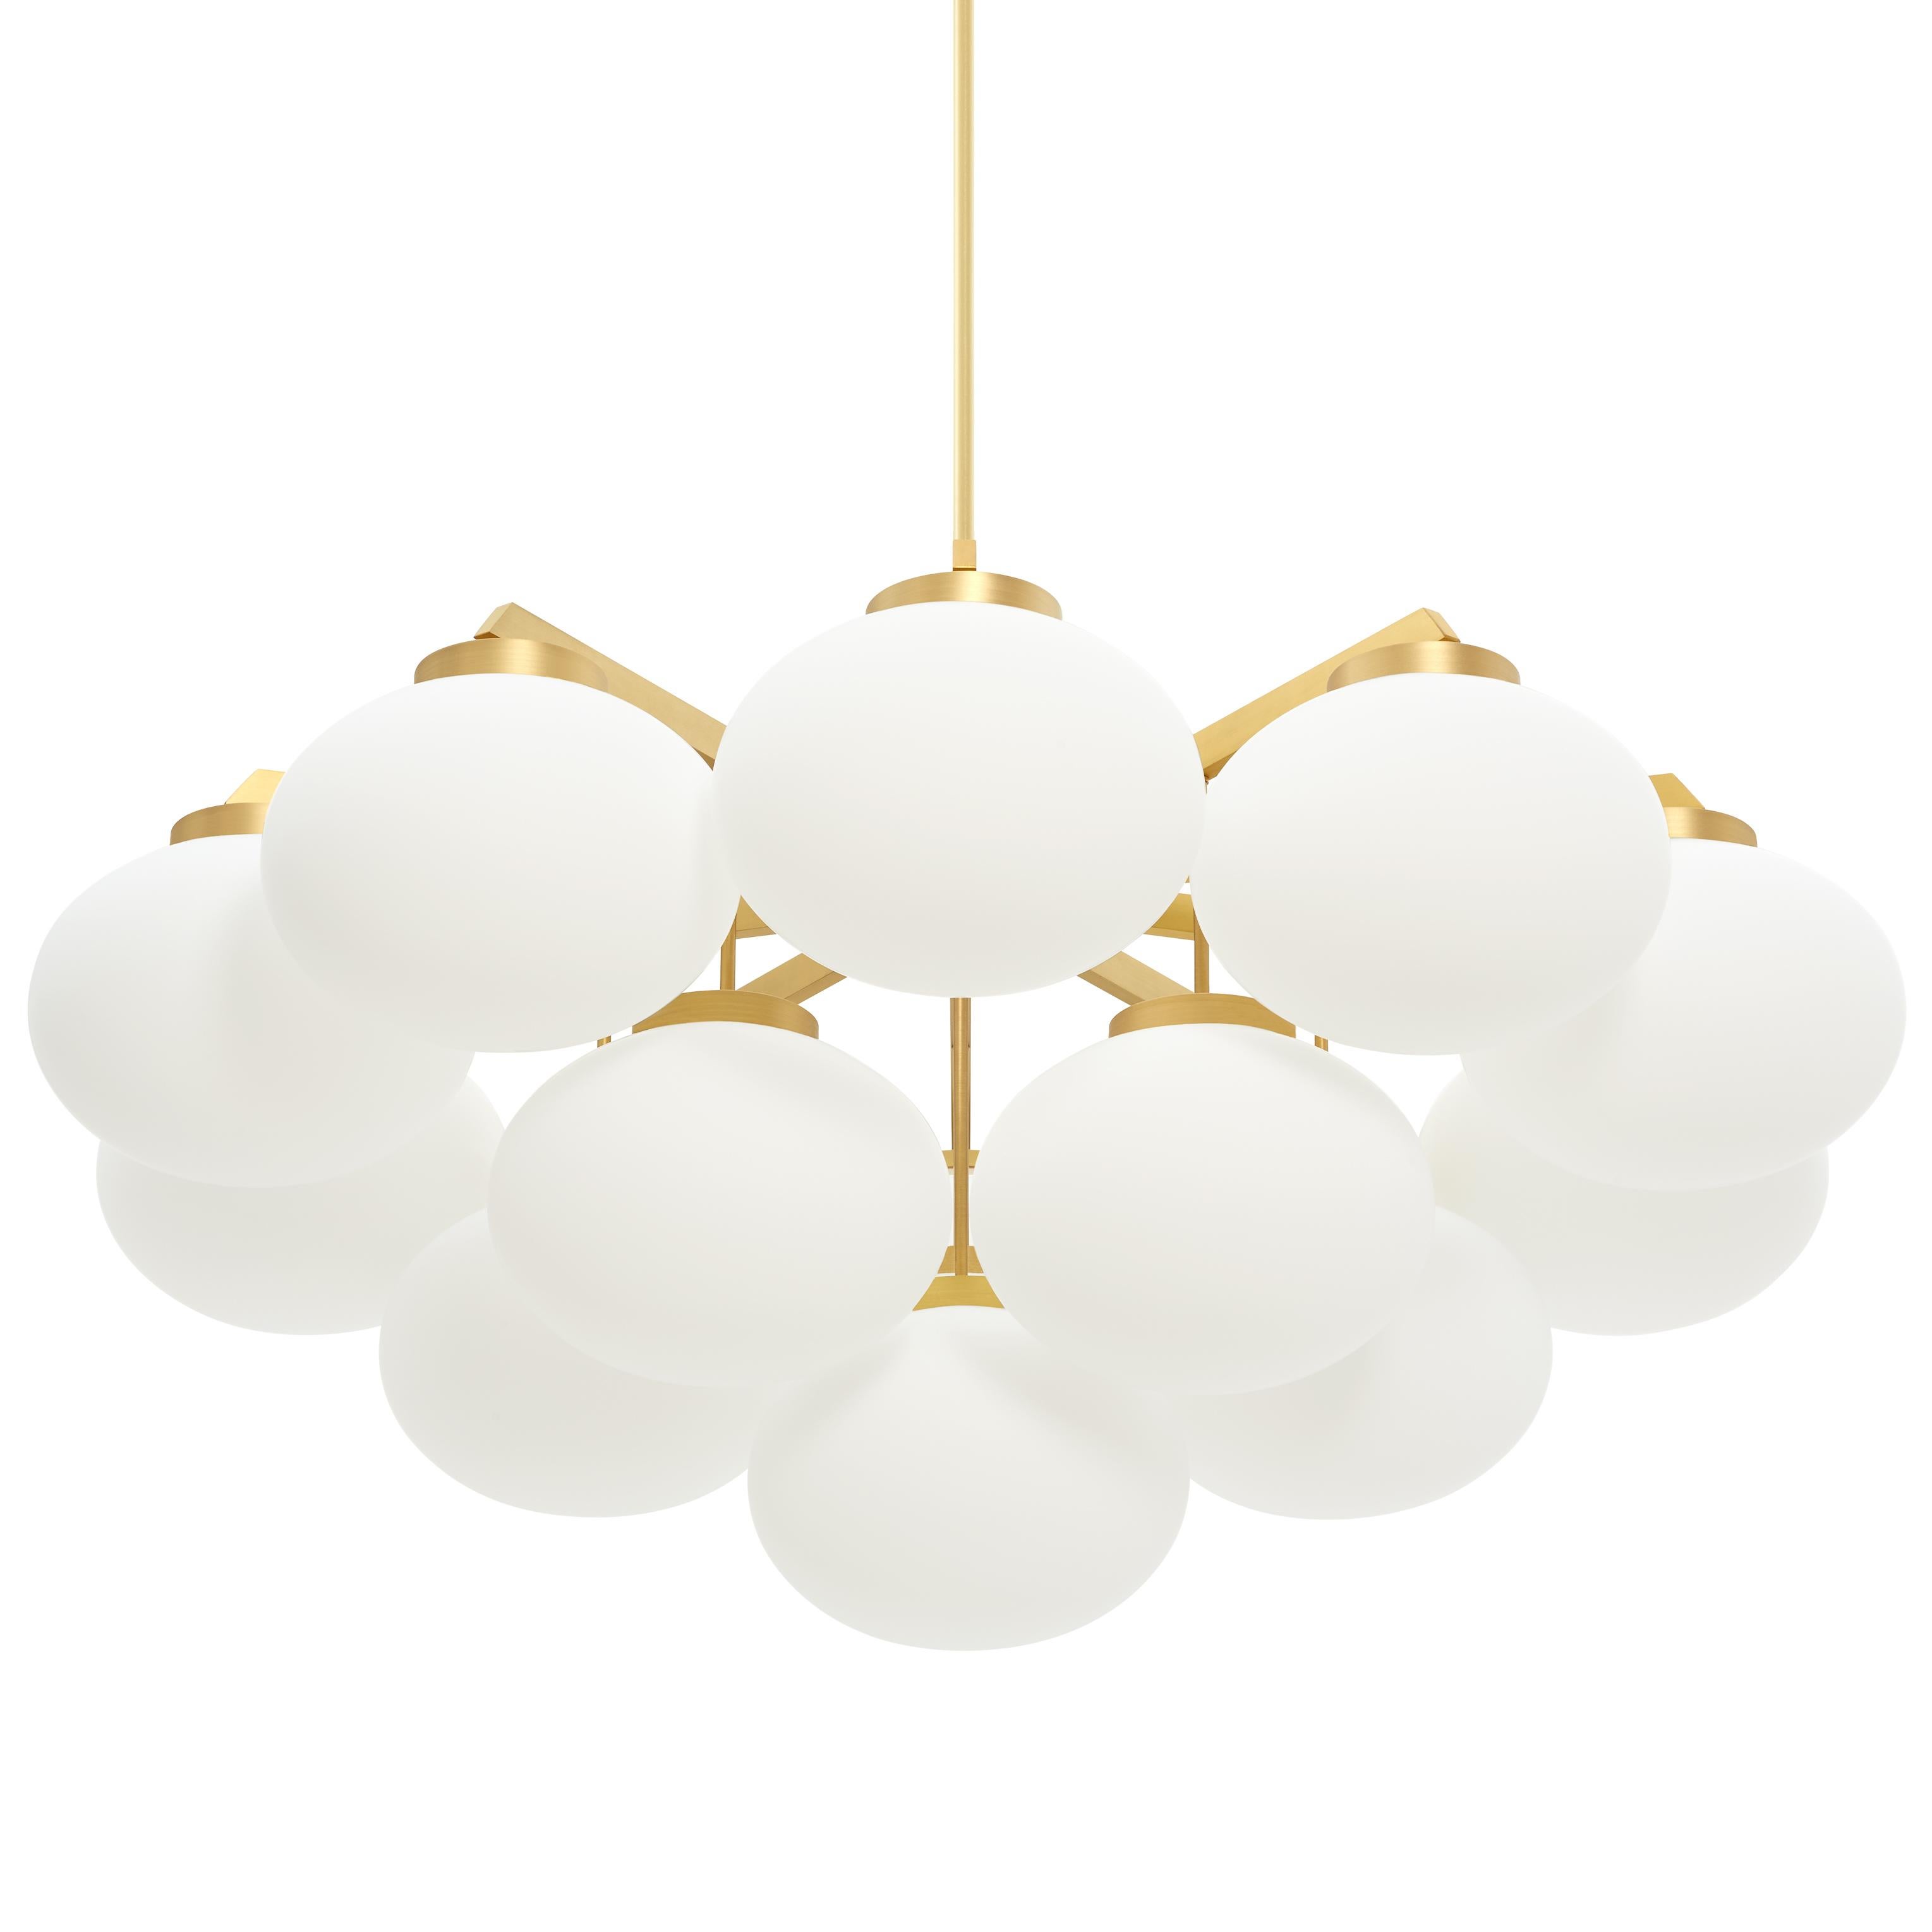 Satin brass large cloudesley pendant lamp by CTO Lighting
Materials: satin brass with matt opal glass shades
Dimensions: H 58 x W 130 cm

All our lamps can be wired according to each country. If sold to the USA it will be wired for the USA for